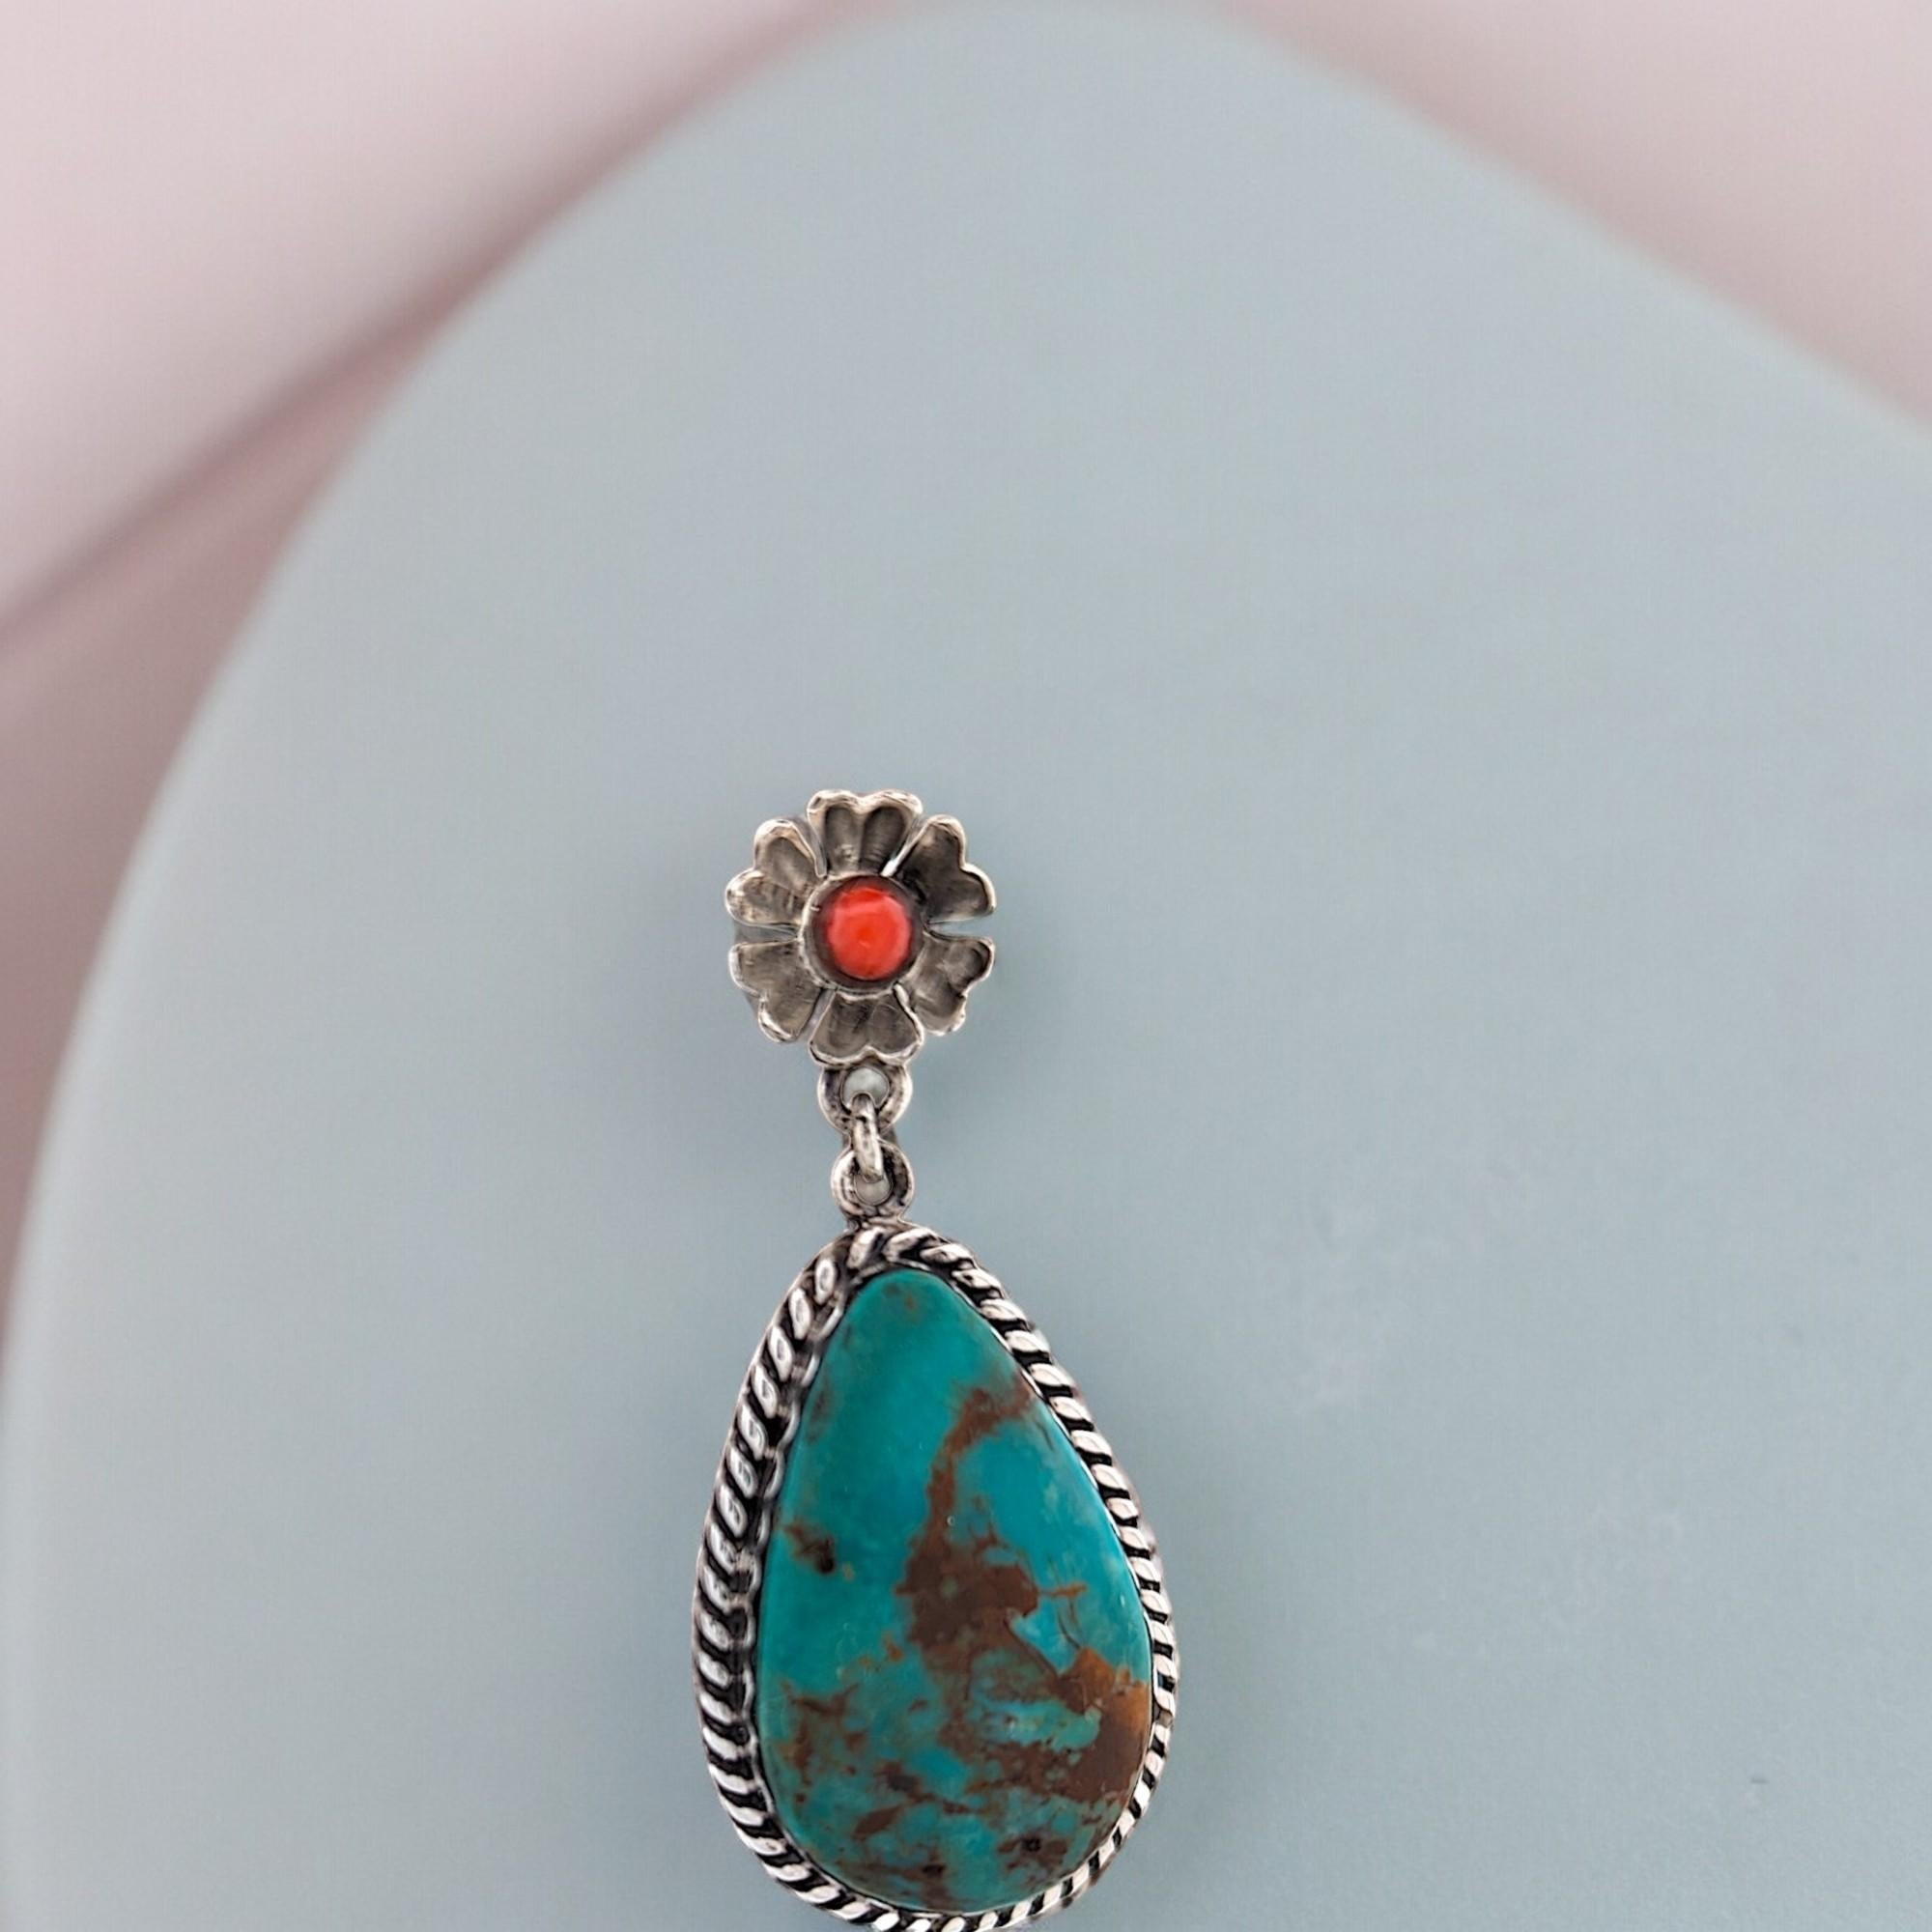 Artisan Handcrafted Sterling silver earrings featuring authentic Kingman Turquoise For Sale